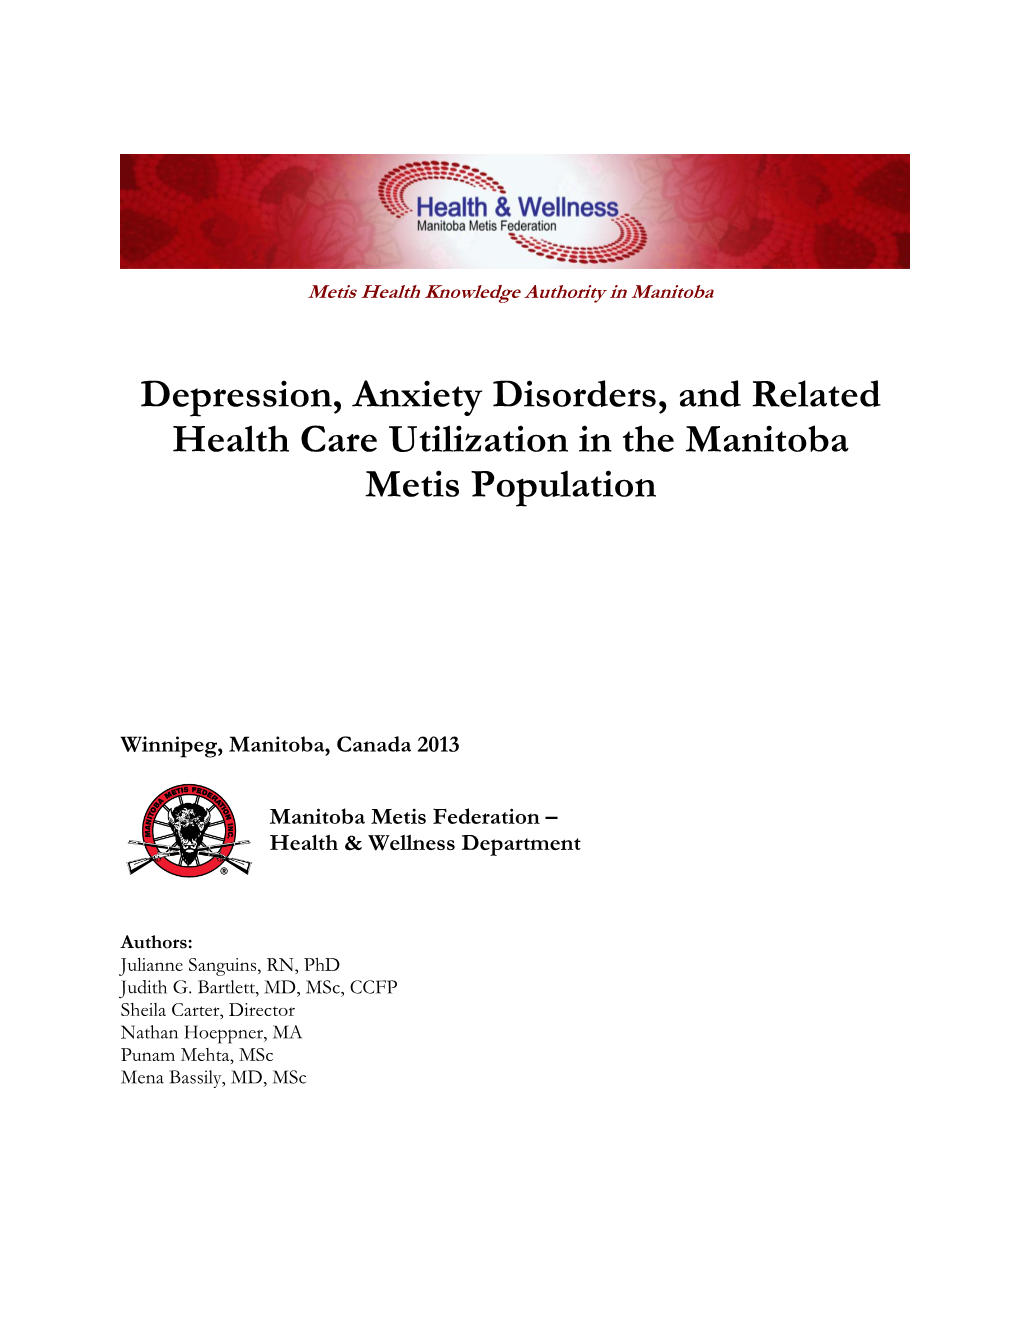 Diabetes and Related Health Care Utilization in the Manitoba Metis